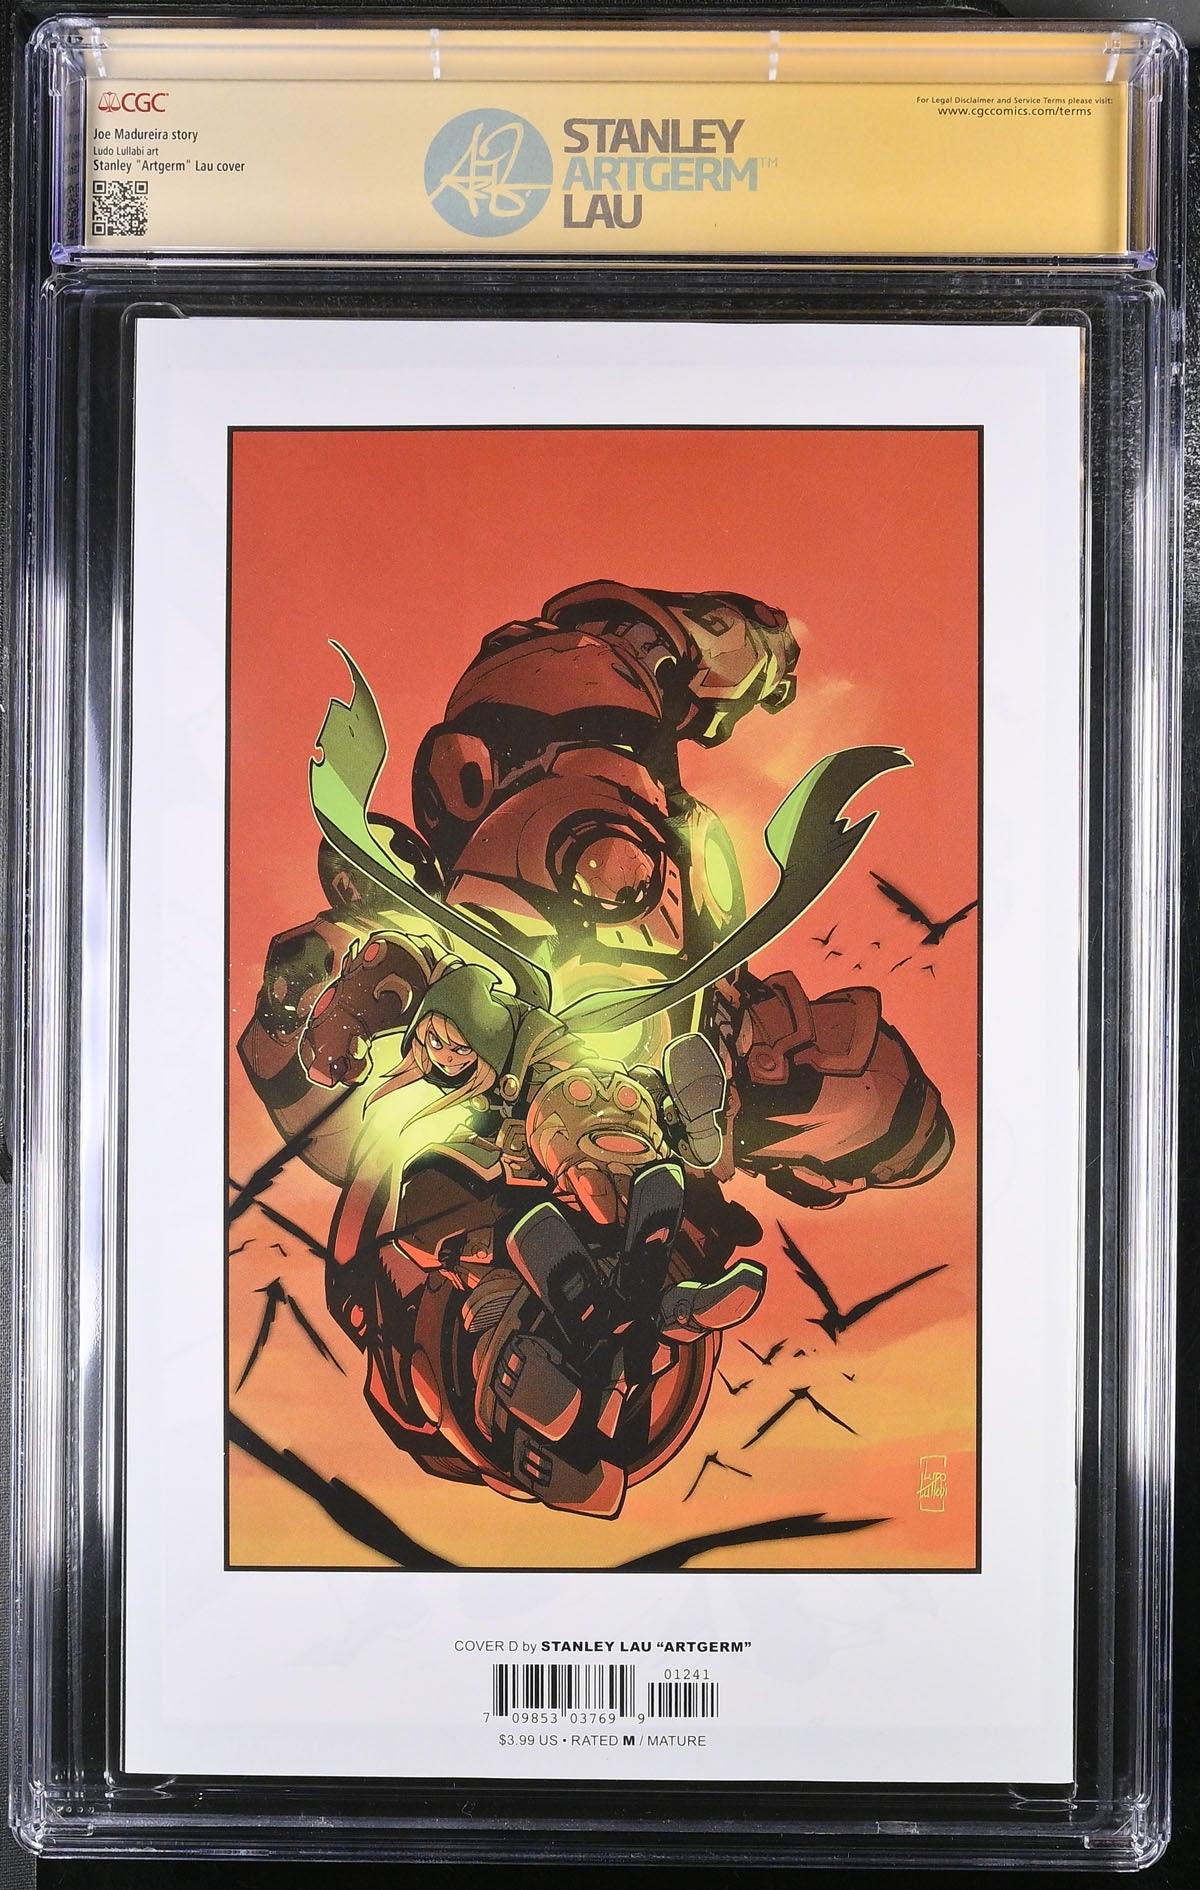 CGC BATTLE CHASERS #12 COVER D LAU VARIANT (9.8) SIGNATURE SERIES - SIGNED BY STANLEY "ARTGERM" - Kings Comics